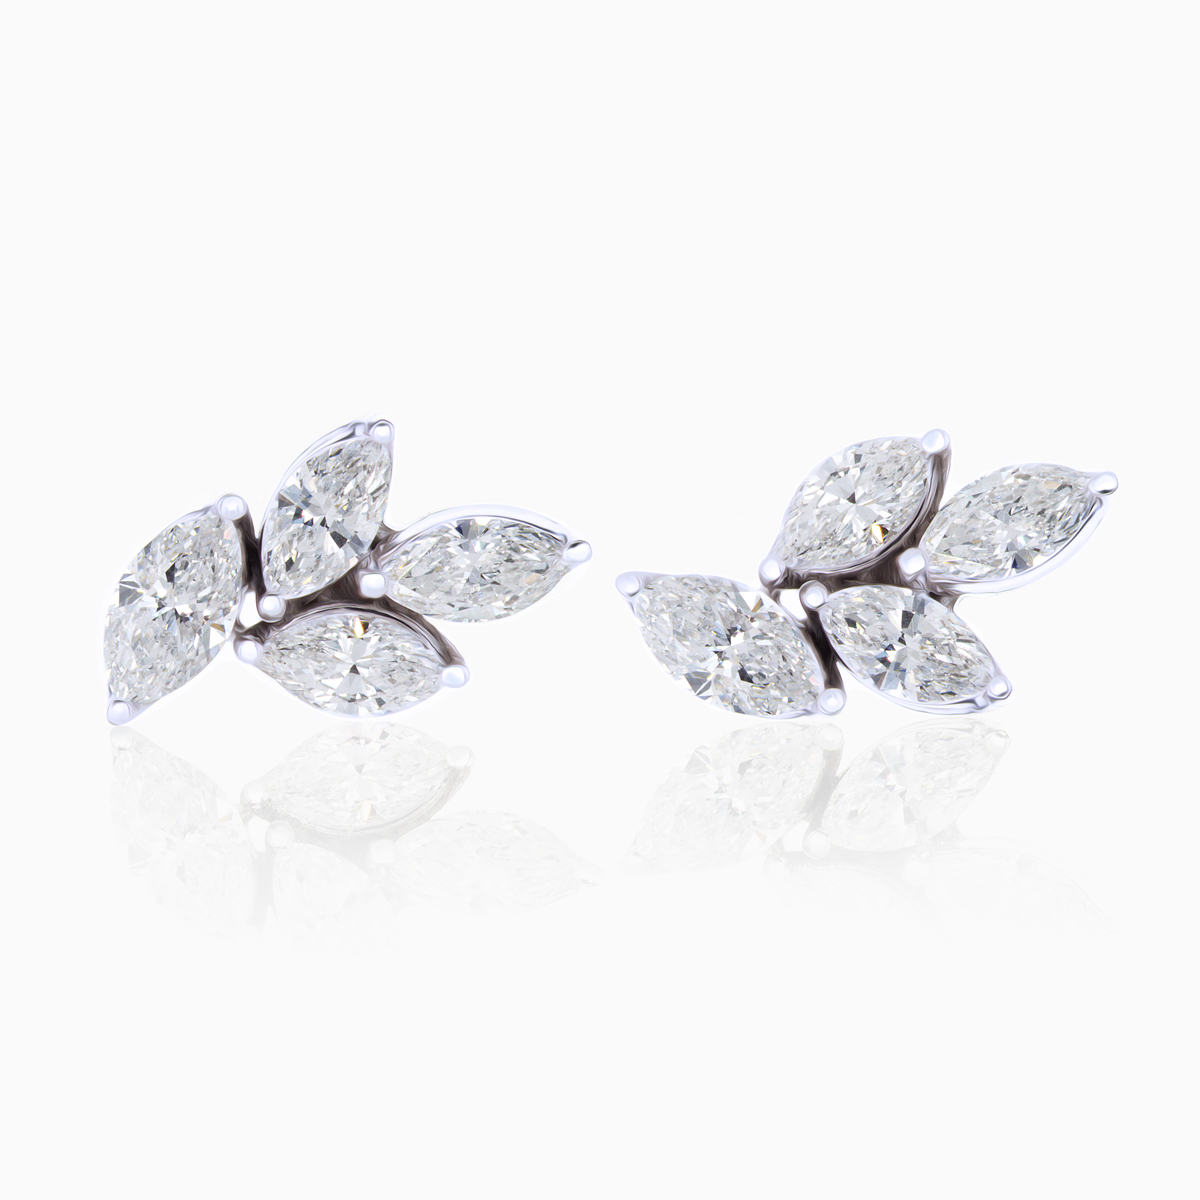 Share more than 233 fashion stud earrings for women super hot